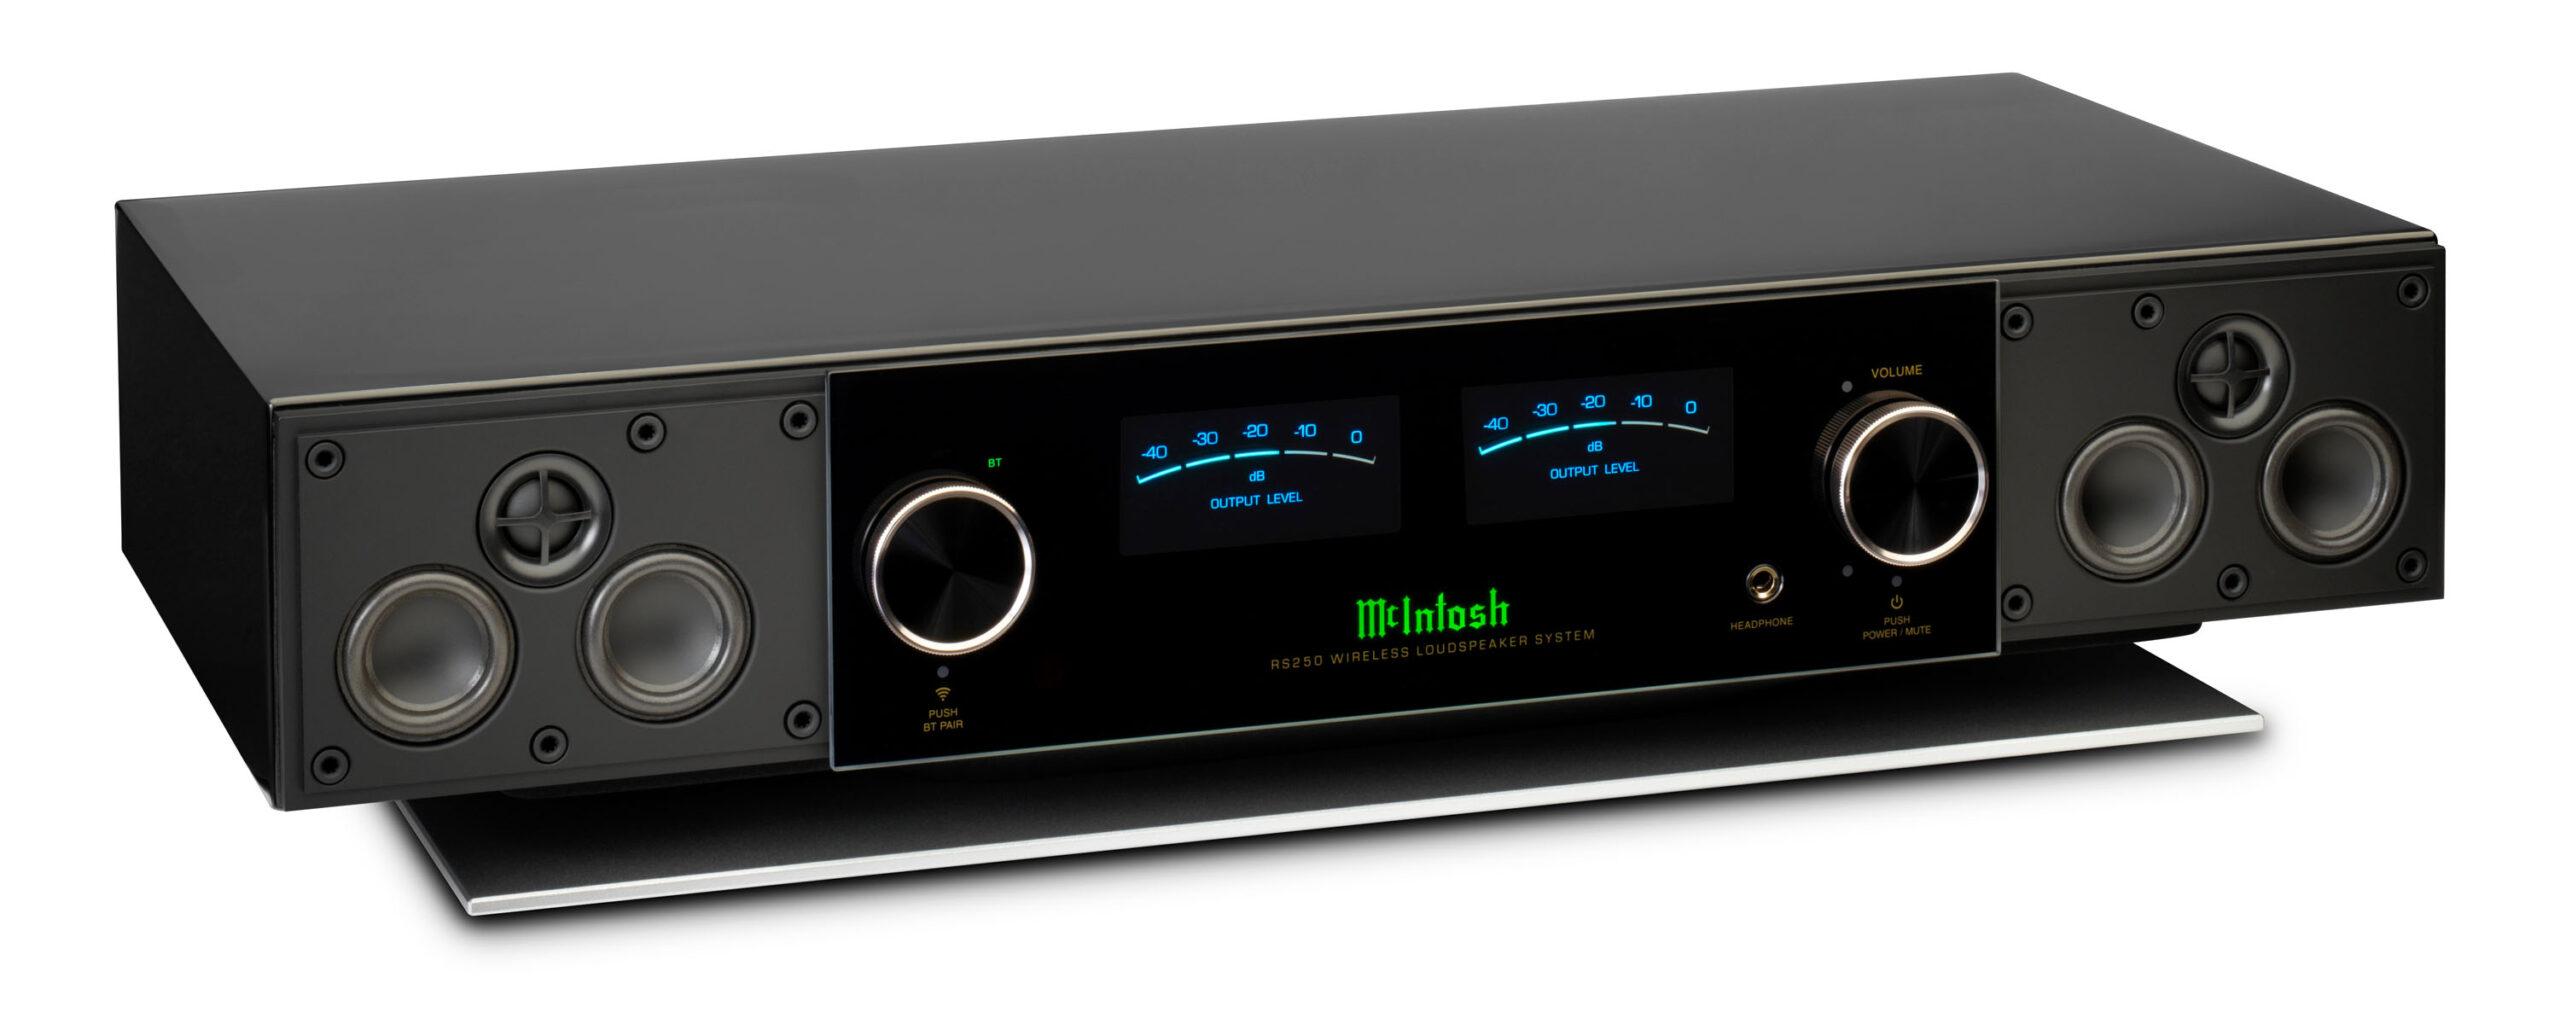 Two wireless speakers, the RS150 and RS250, offer streaming convenience with unmistakable McIntosh style, quality & performance. McIntosh 419ed6fc rs250 angle no grilles hi res scaled